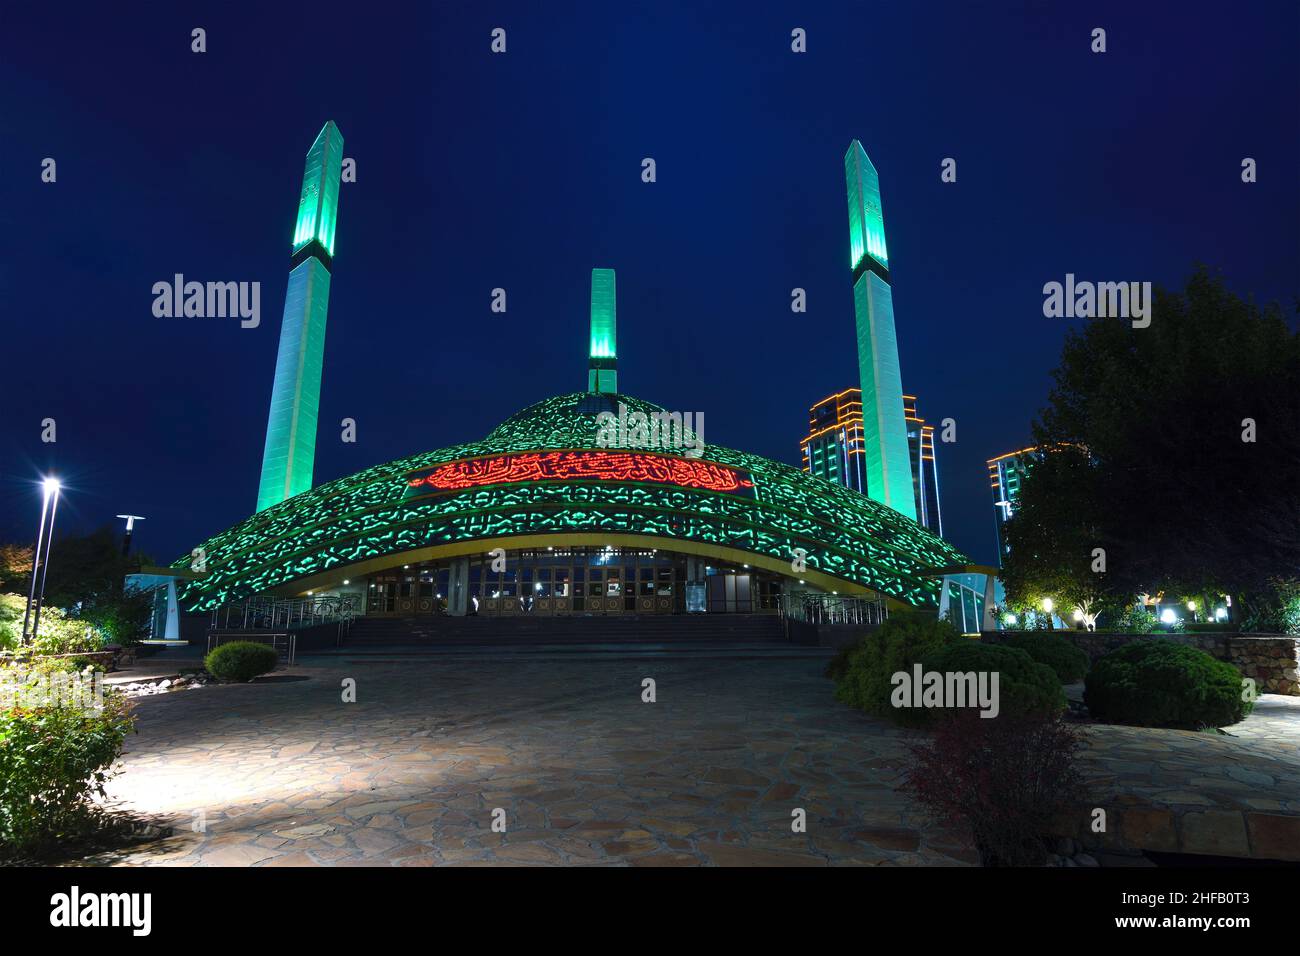 ARGUN, RUSSIA - SEPTEMBER 28, 2021: Mosque 'Mother's Heart' in the night illumination on the late evening. Argun, Chechen Republic Stock Photo